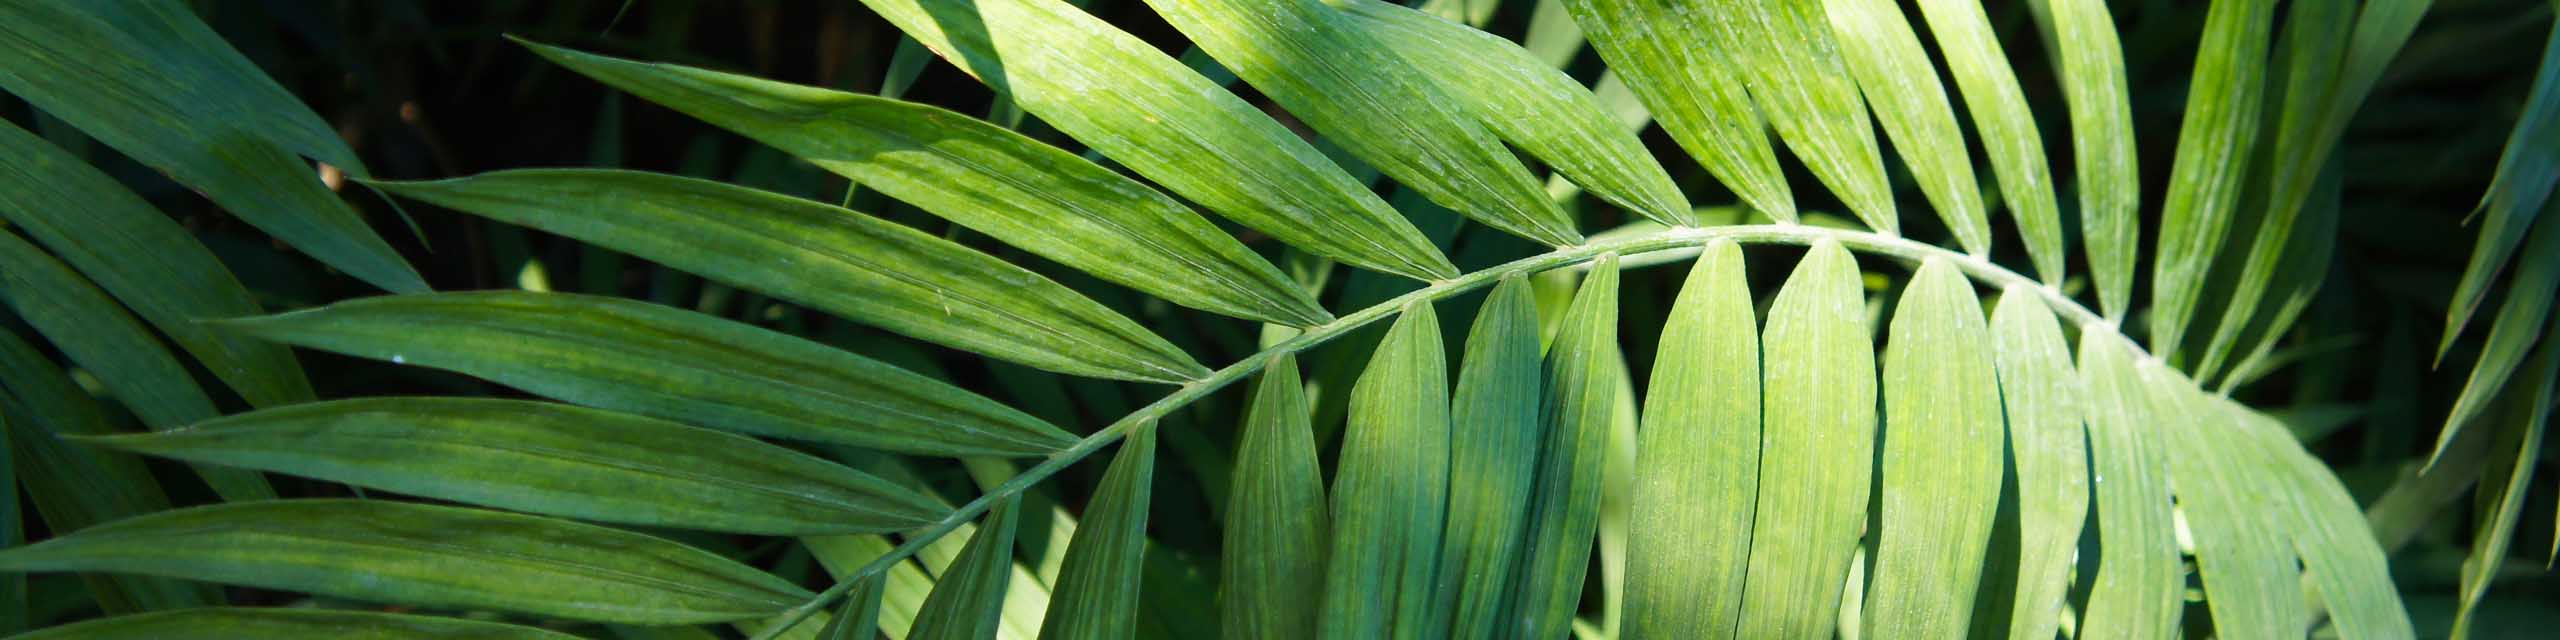 Close up of the leaves of a parlour palm plant.